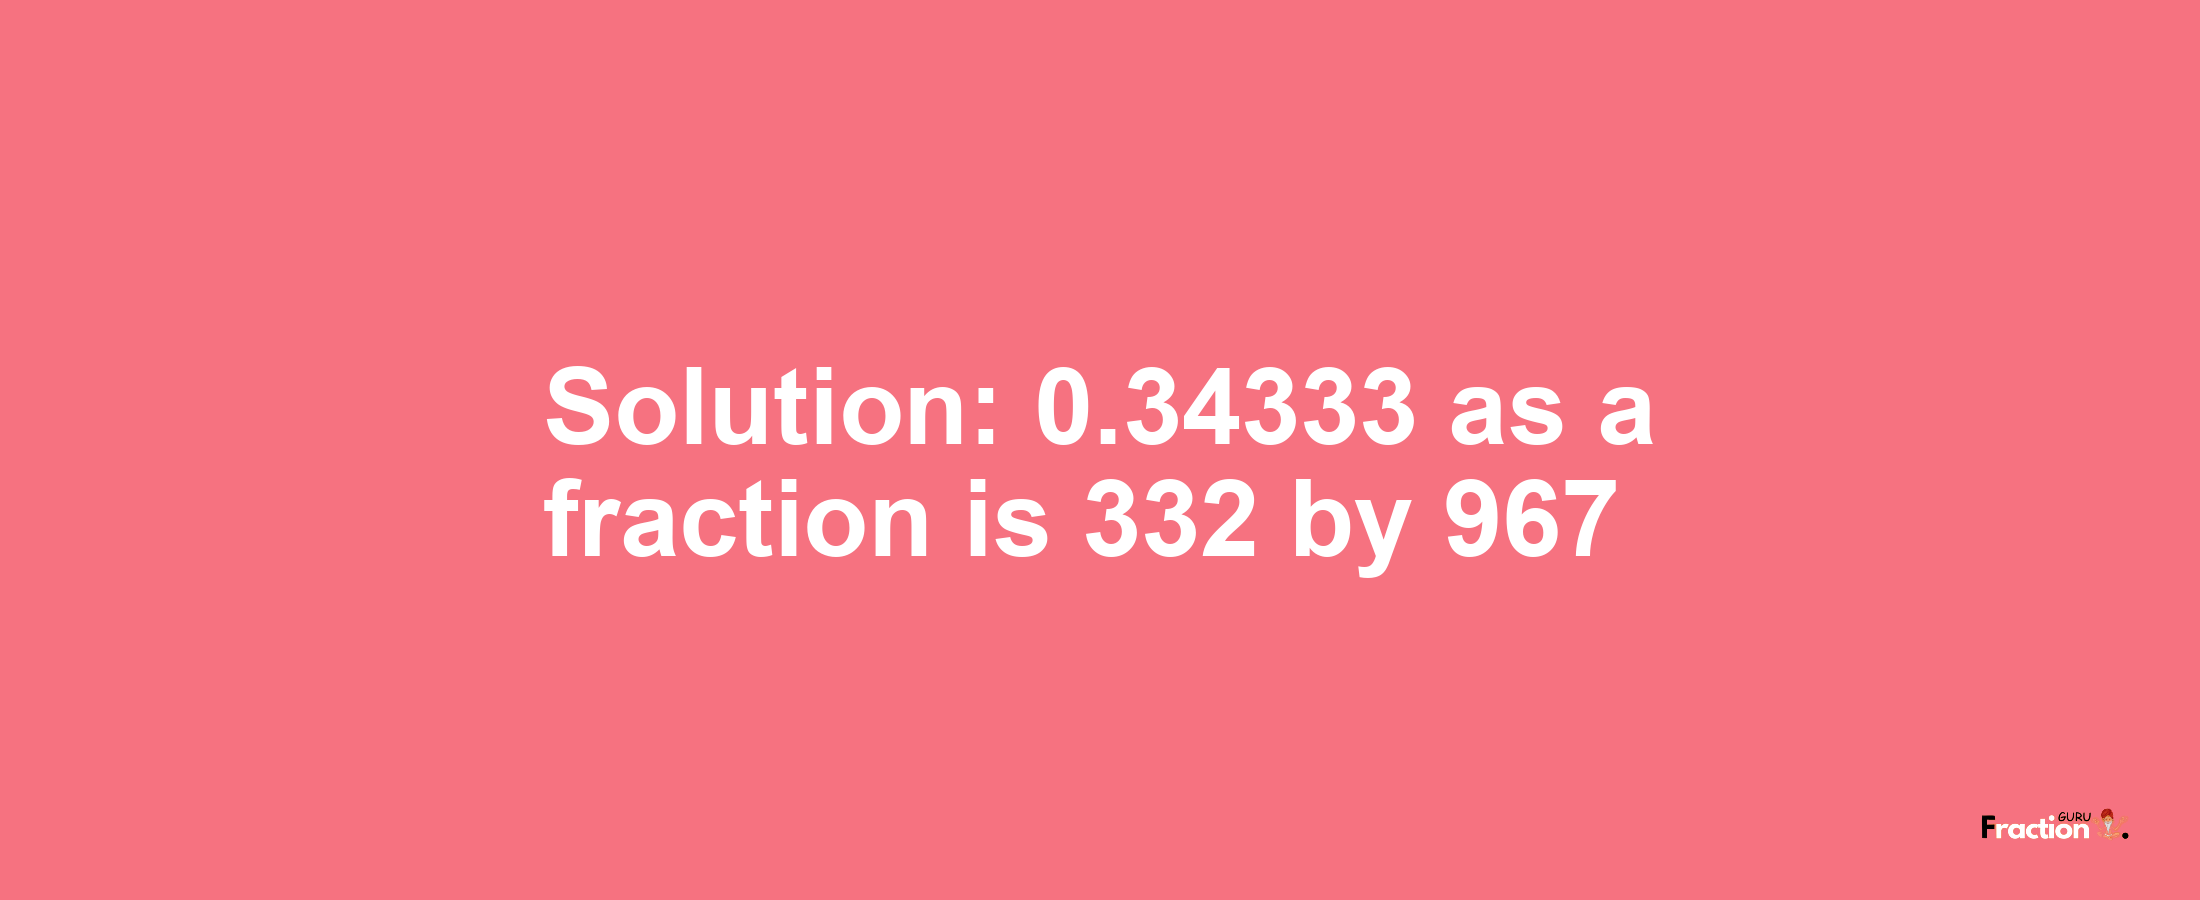 Solution:0.34333 as a fraction is 332/967